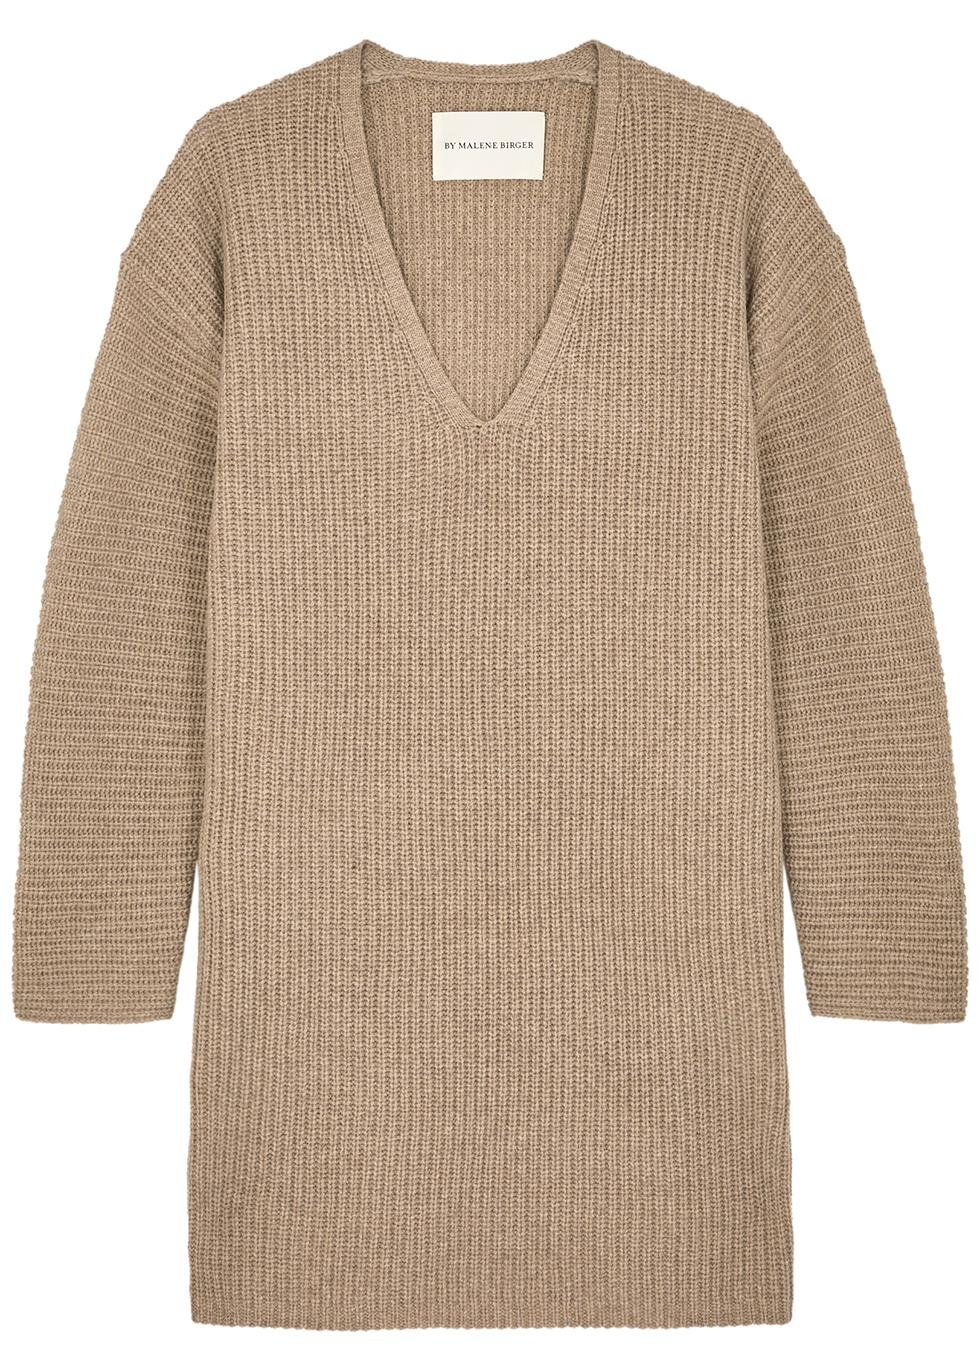 Falina brown ribbed wool jumper dress by BY MALENE BIRGER